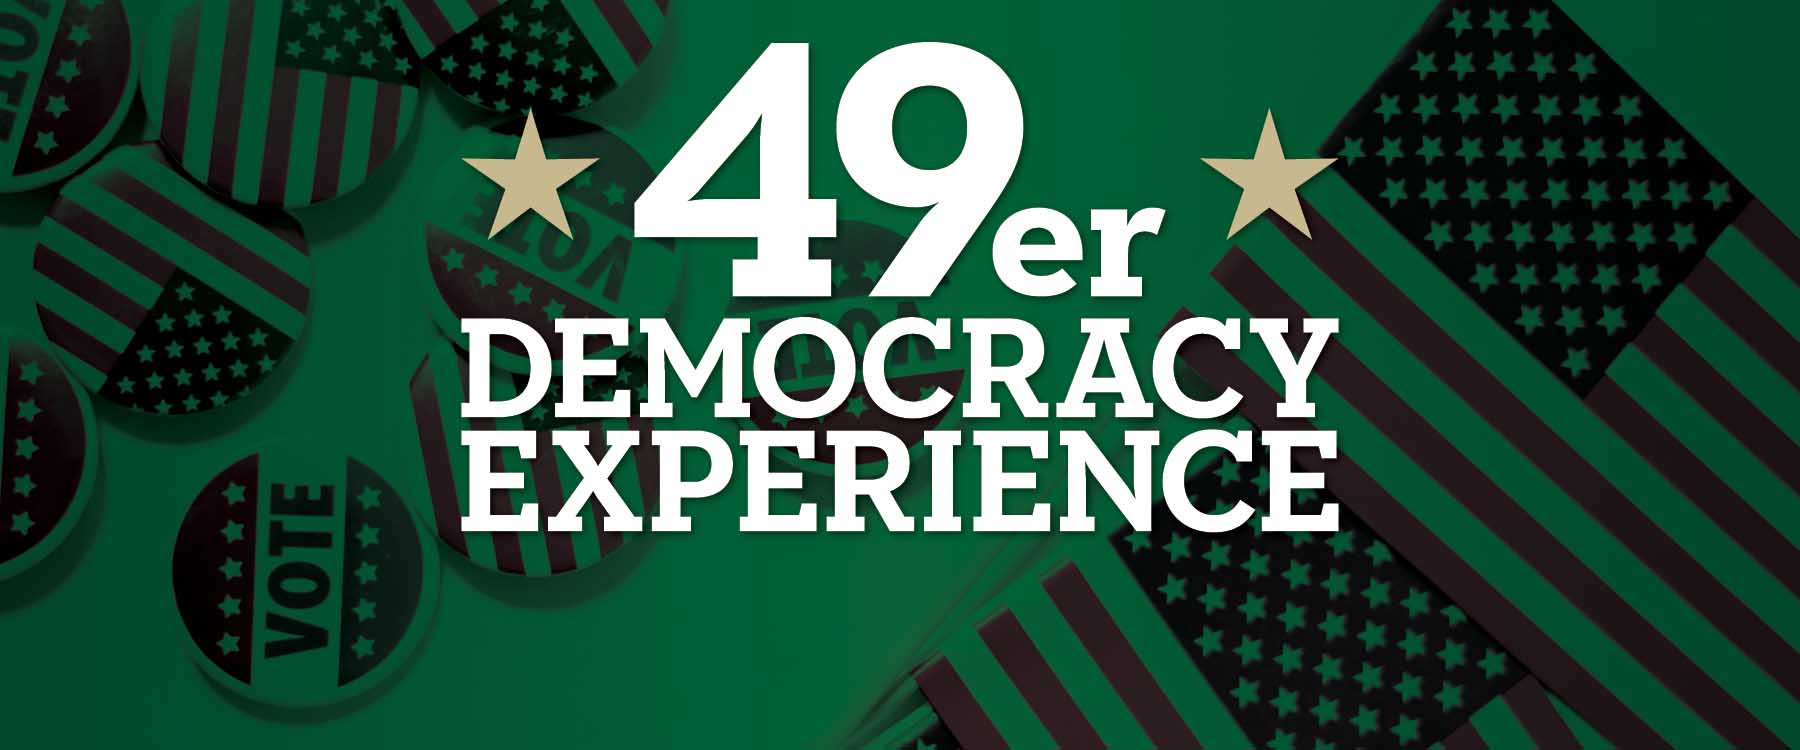 For the UNC Charlotte community, the 49er Democracy Experience offers a dynamic, nonpartisan platform for learning about and engaging in civic life. 